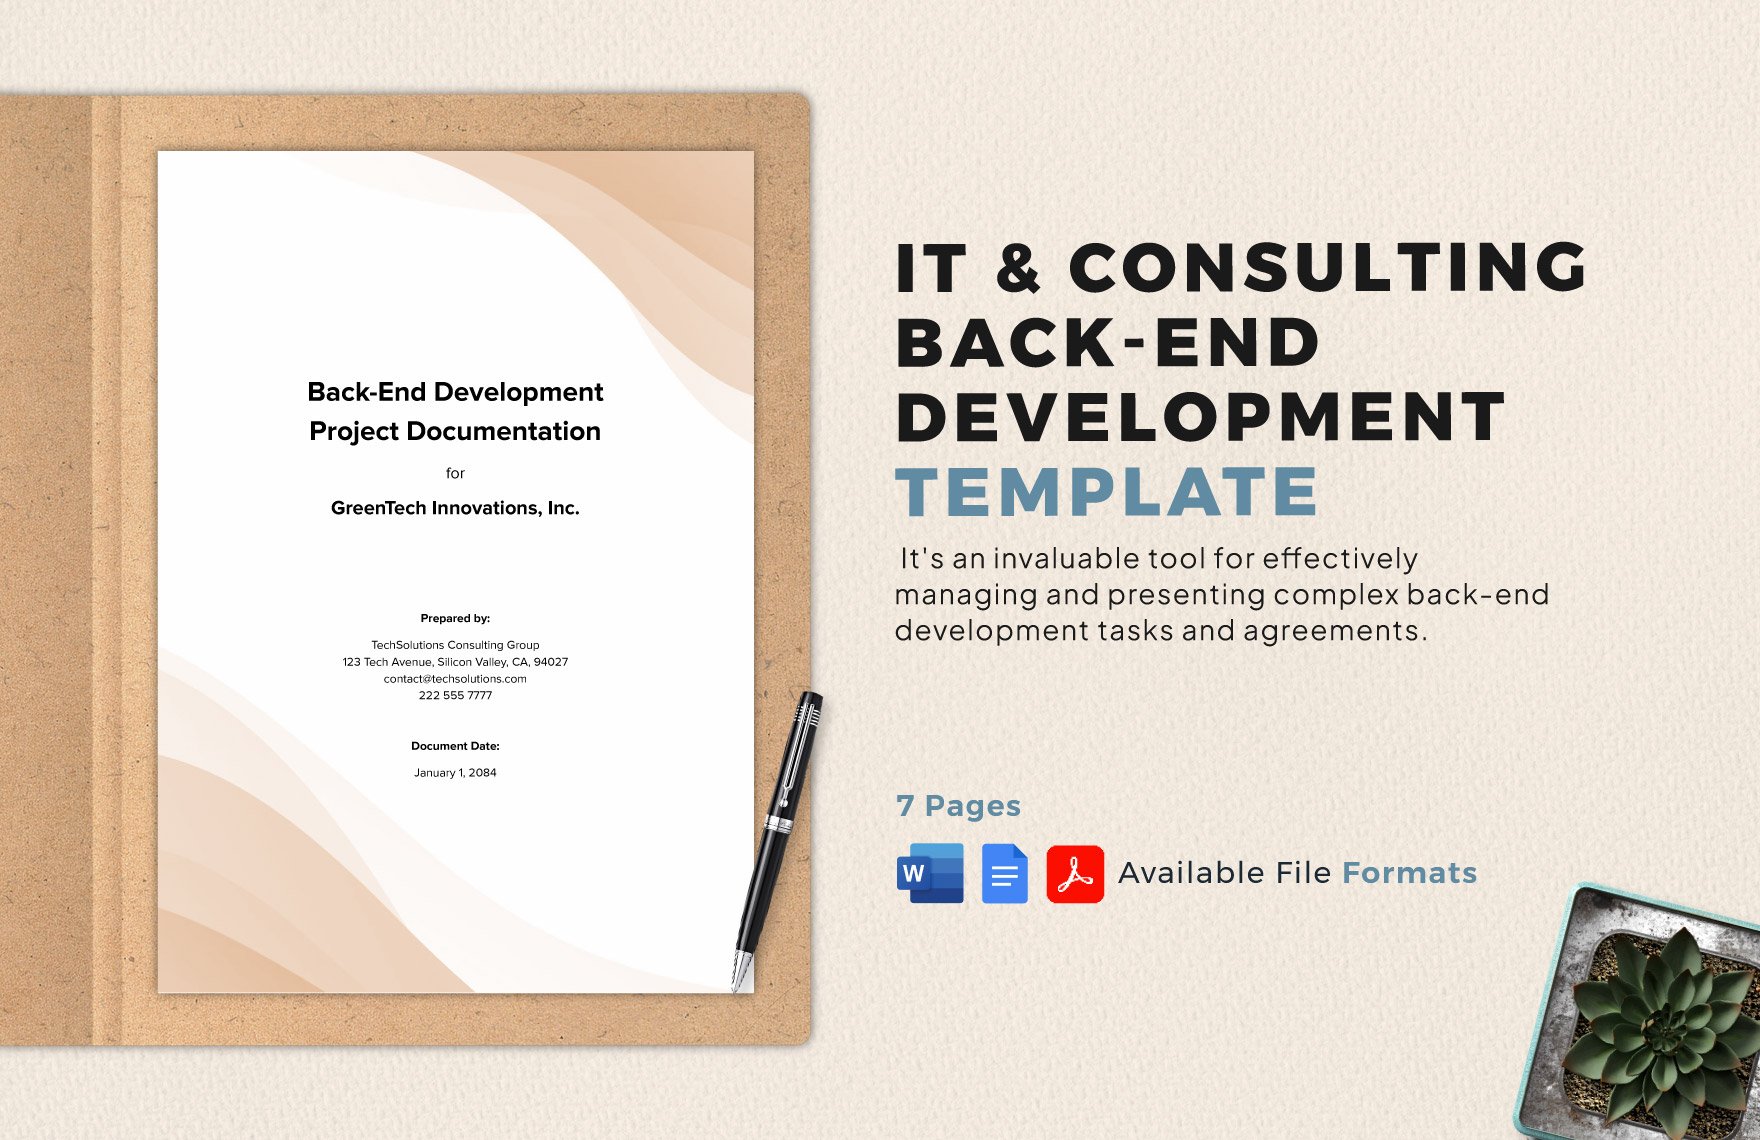 IT & Consulting Back-end Development Template 